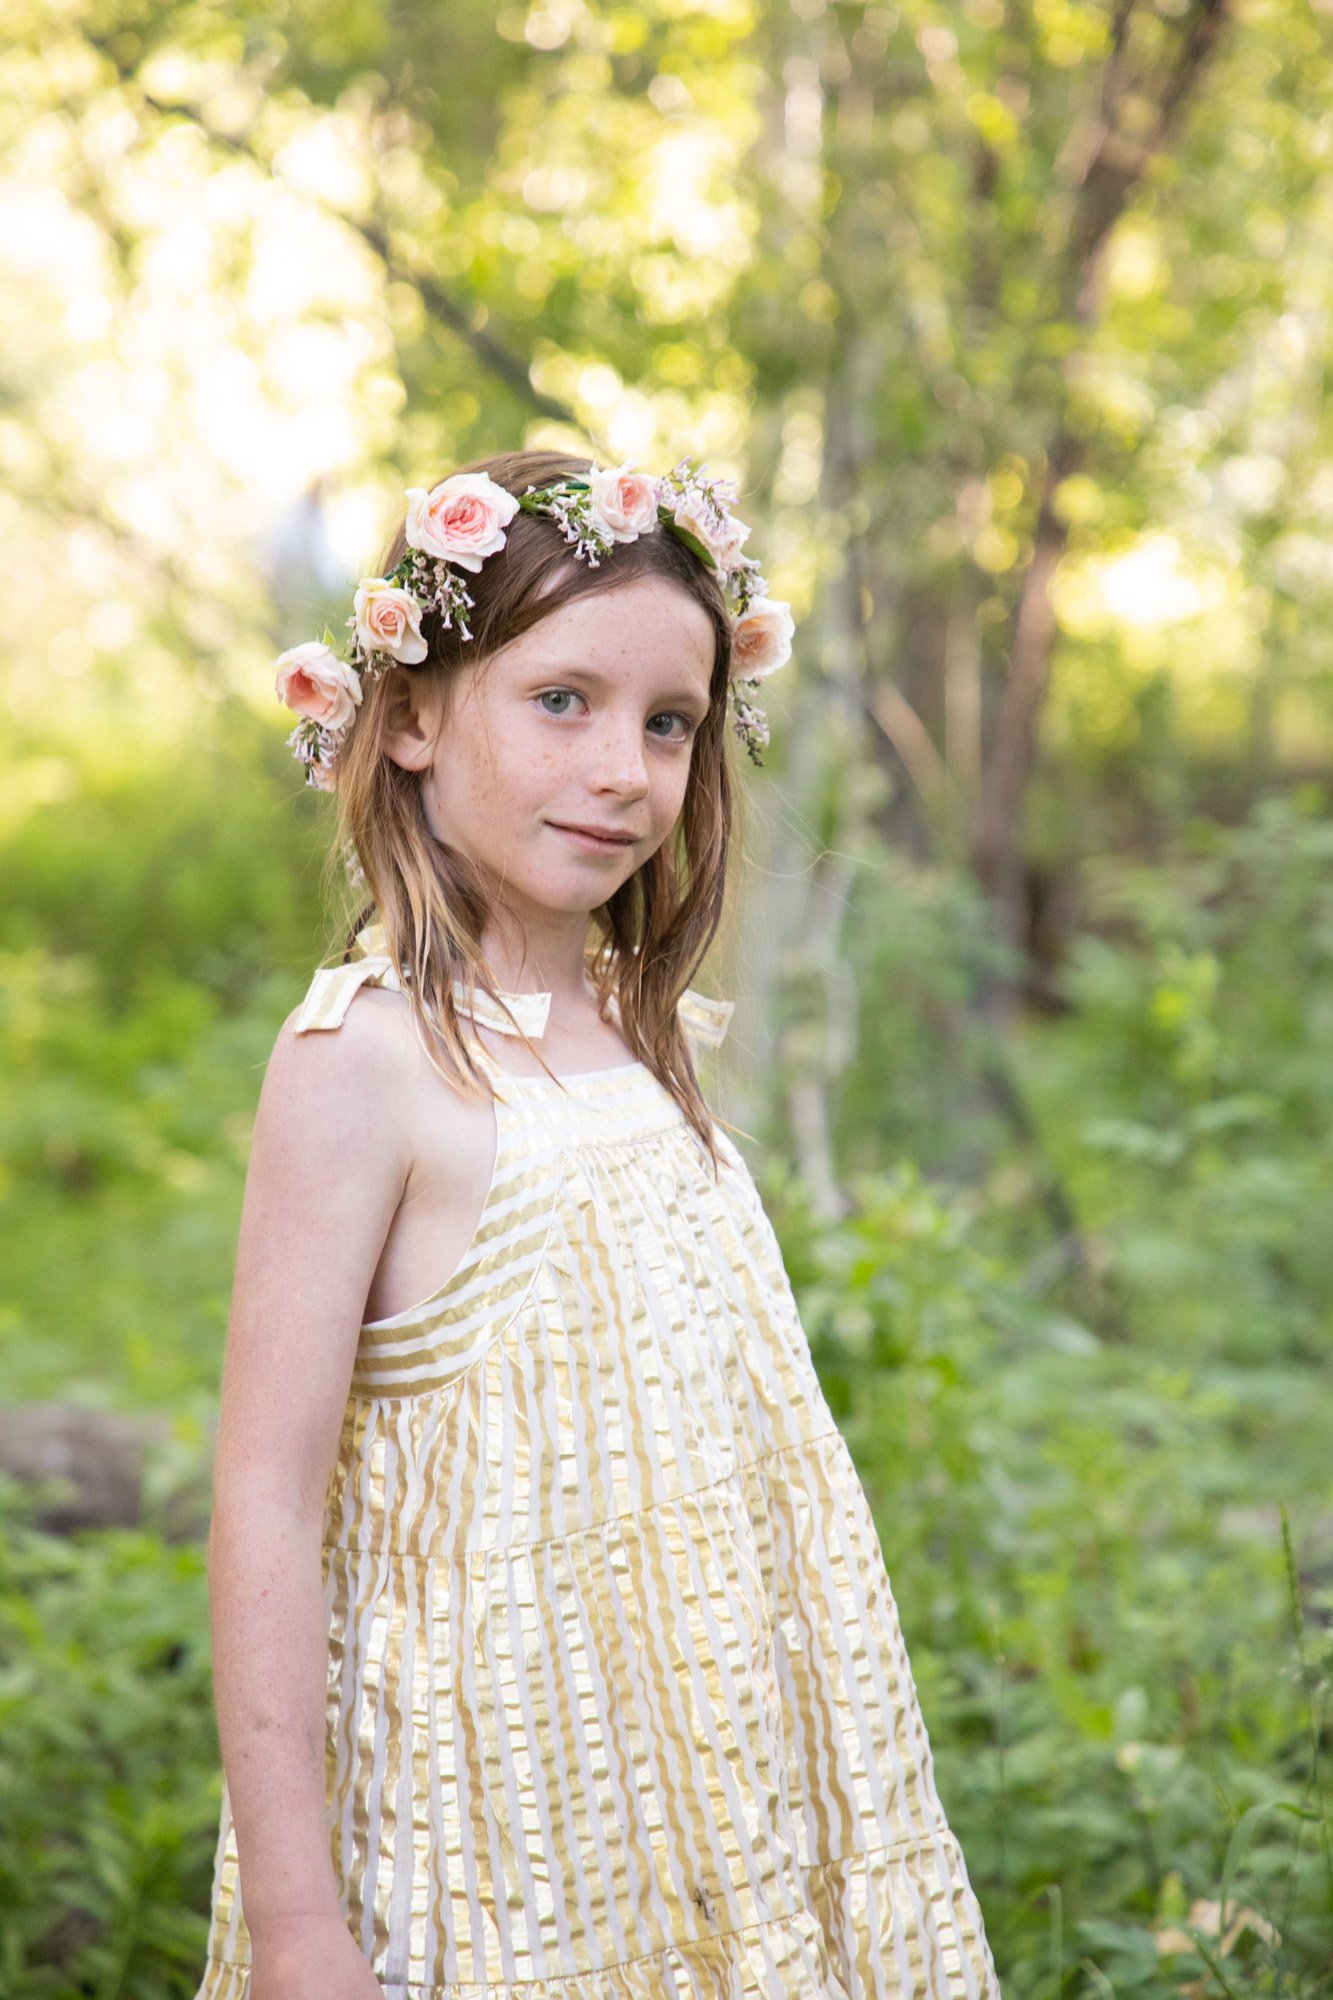 Lewis family photos in Sun Valley, Idaho with photography by Tessa Sheehan